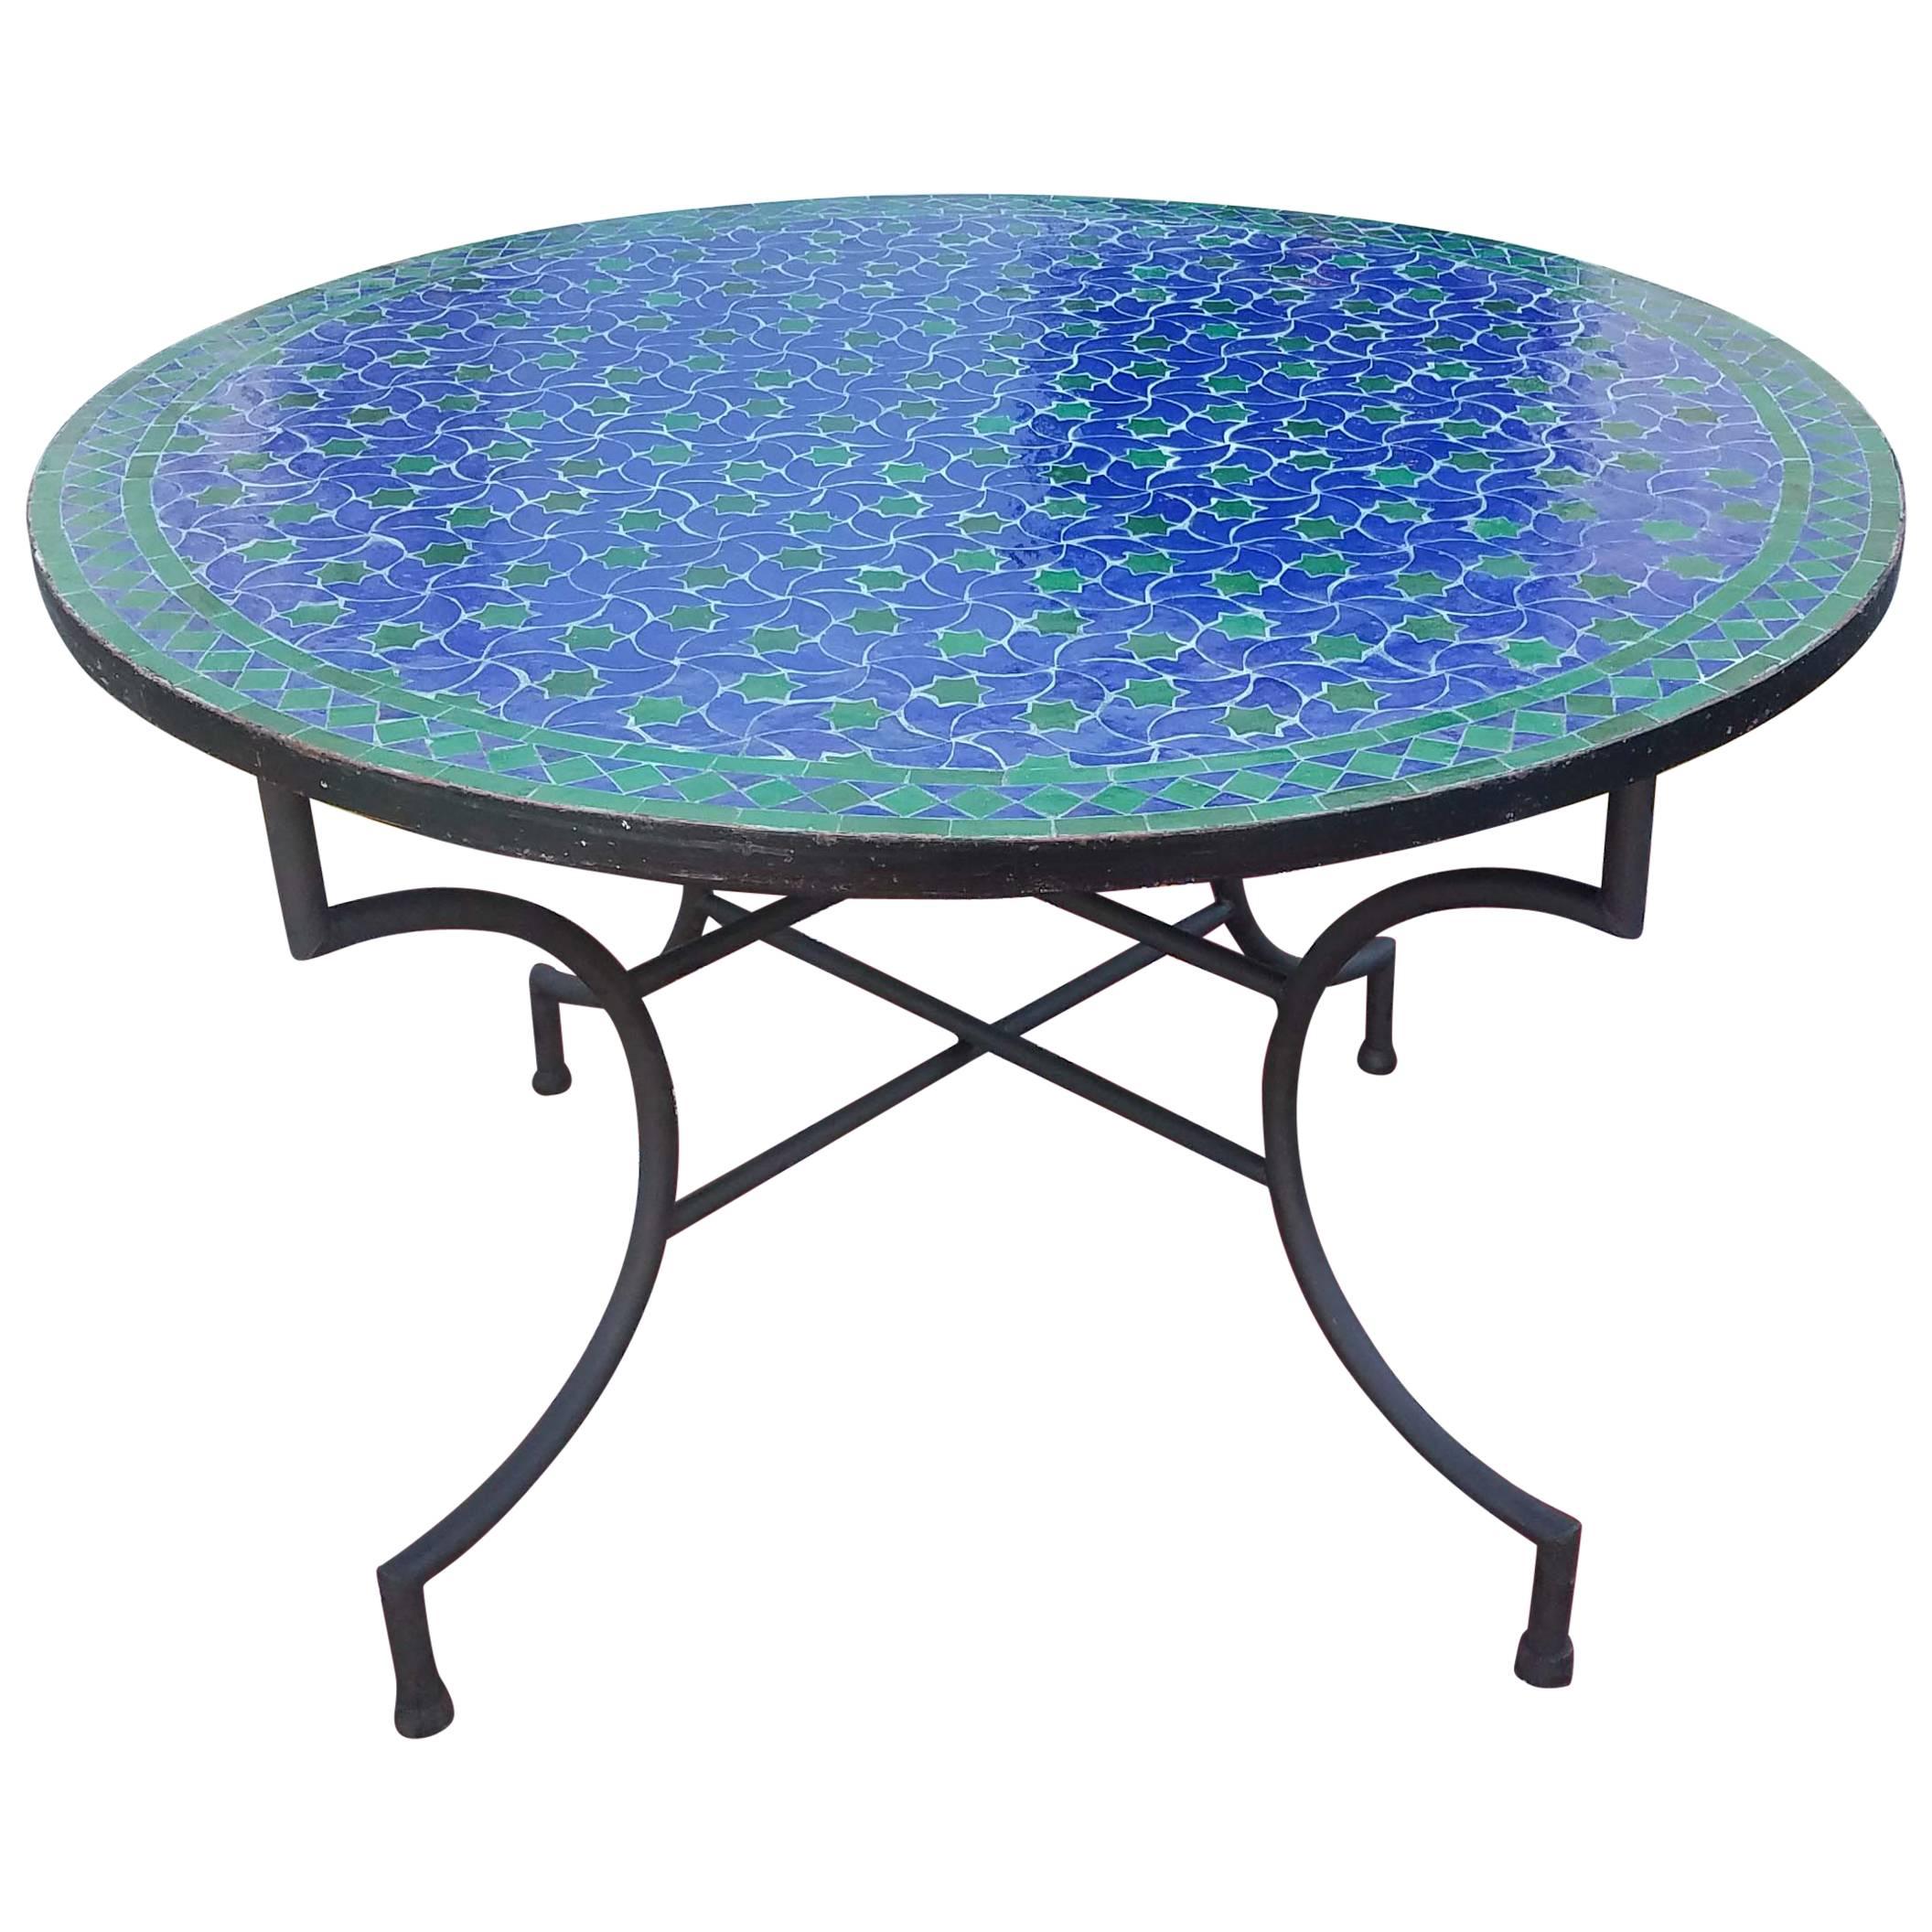 Round Moroccan Mosaic Table, Blue / Green